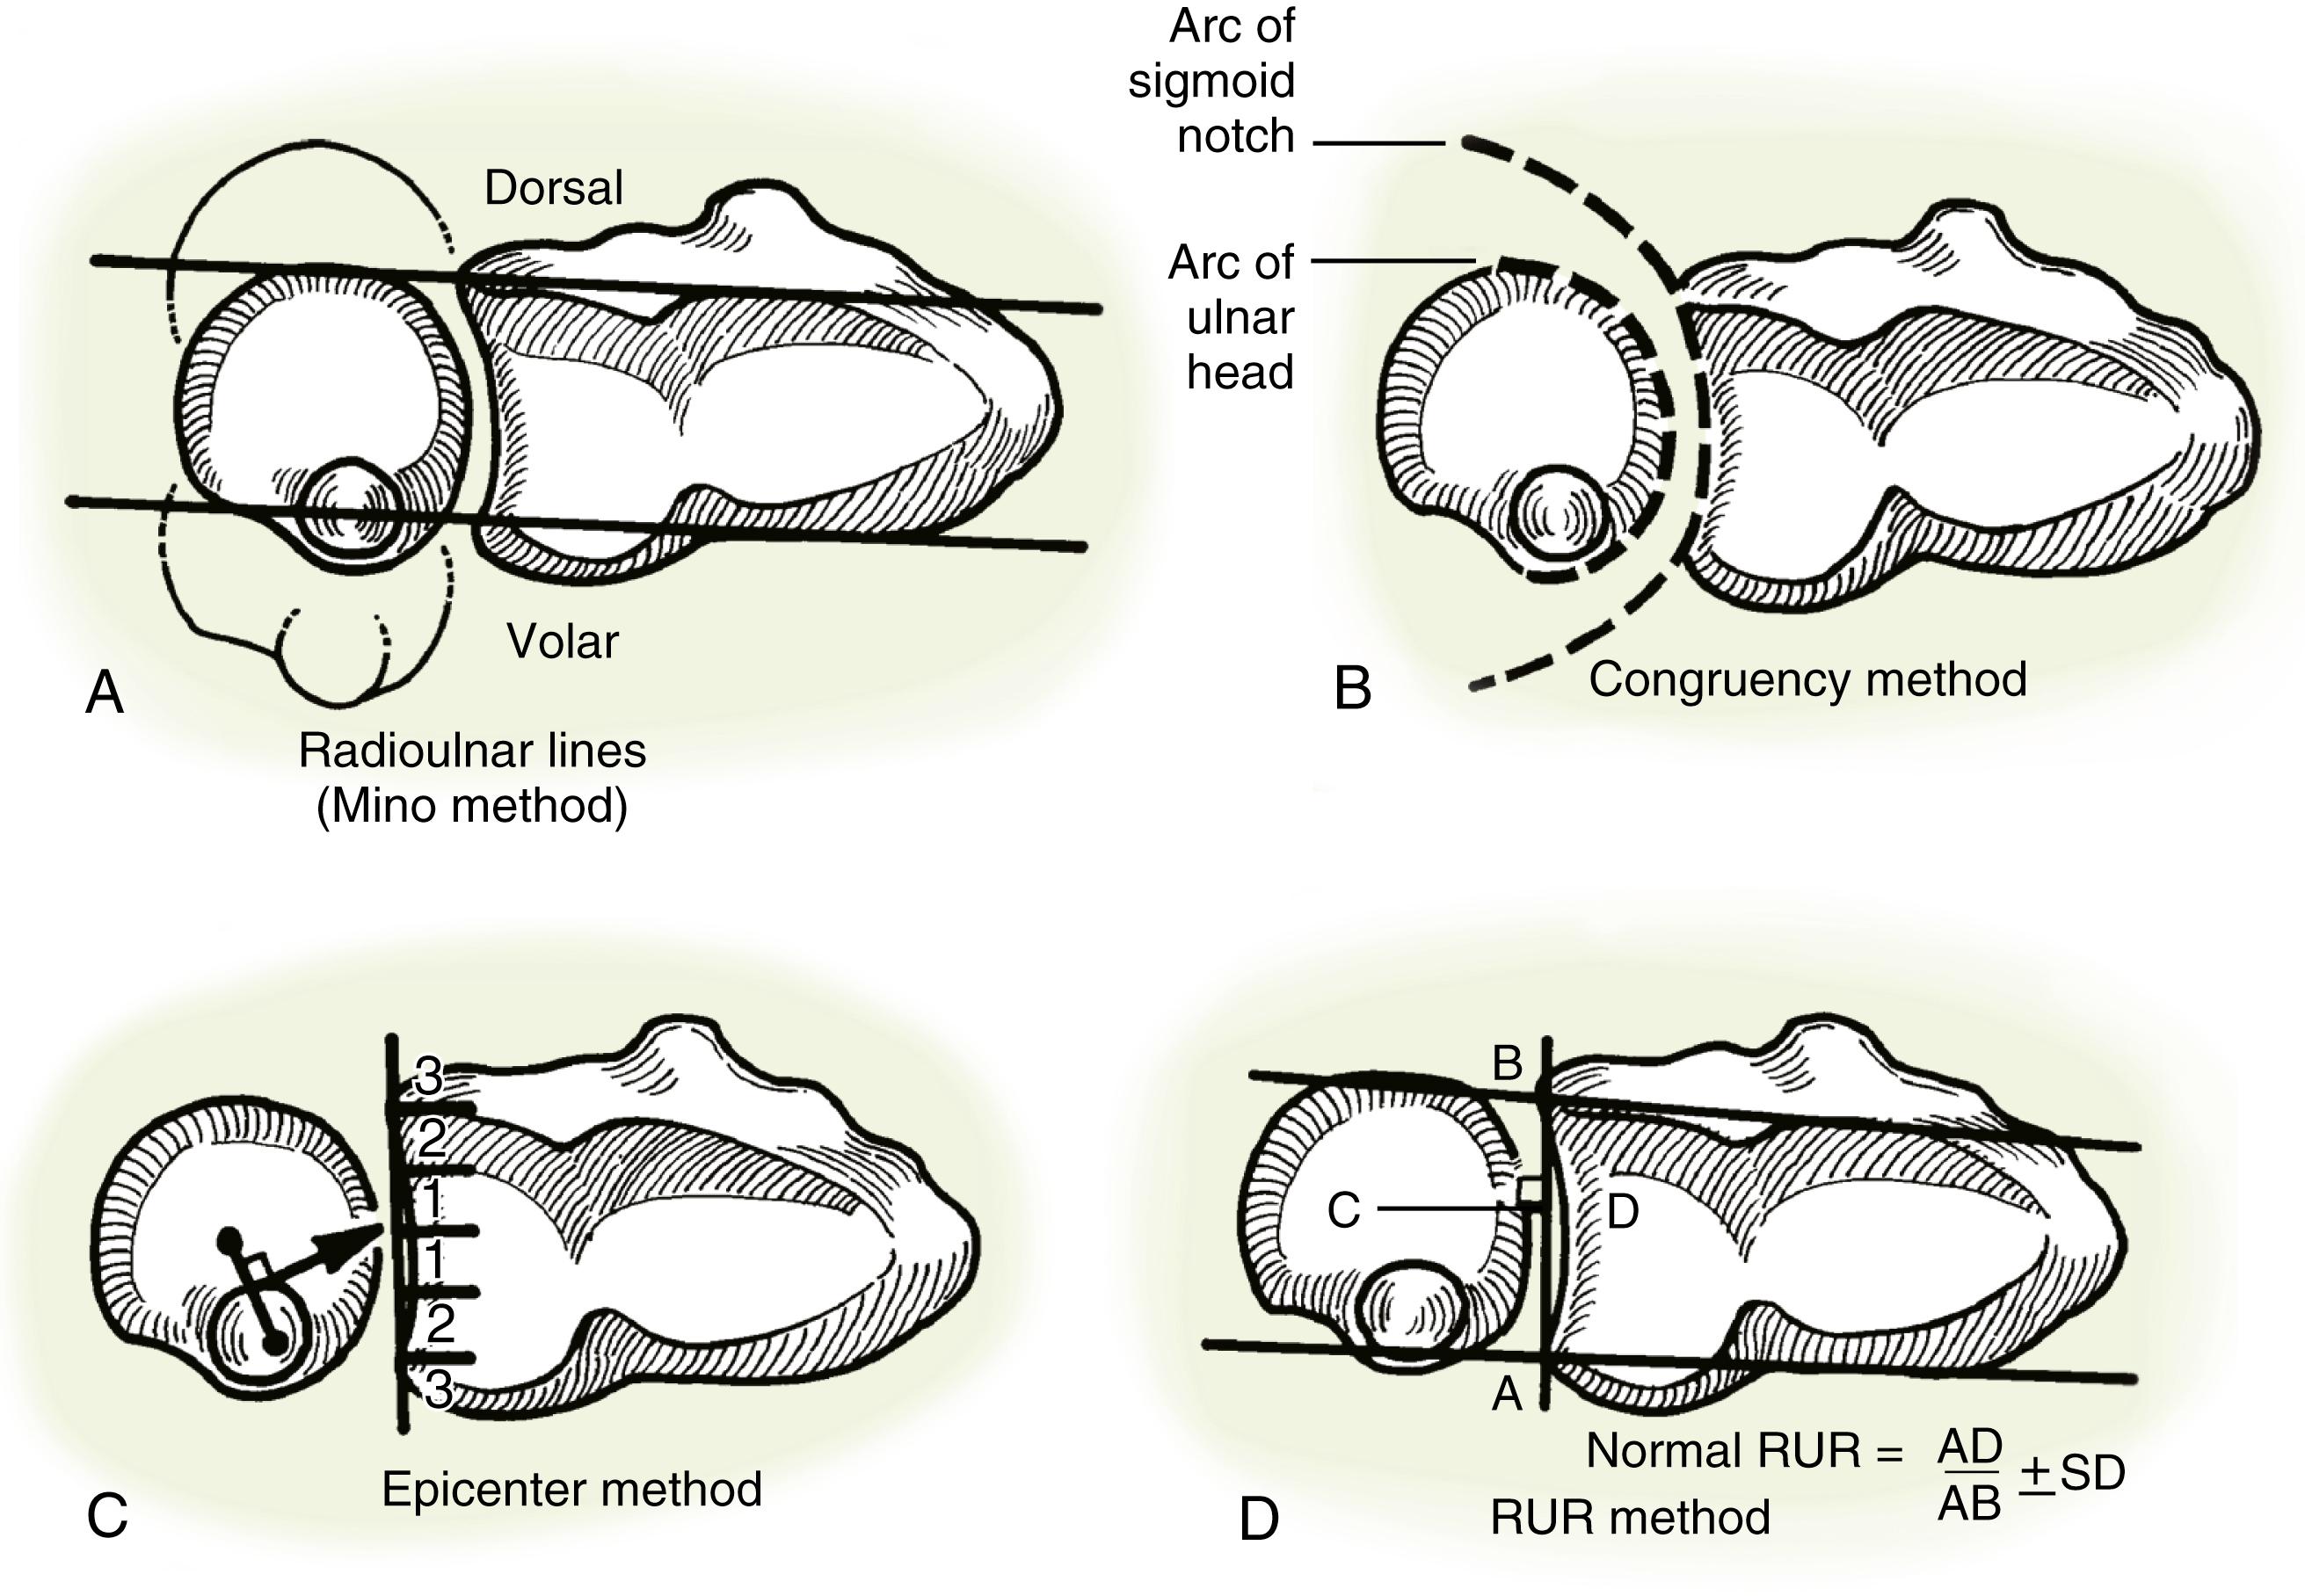 Fig. 14.11, Measurement methods for assessing distal radial ulnar joint instability on axial computed tomography images. A, Radioulnar lines (Mino method). B, Congruency method. C, Epicenter method. D, Radioulnar ratio (RUR) method.